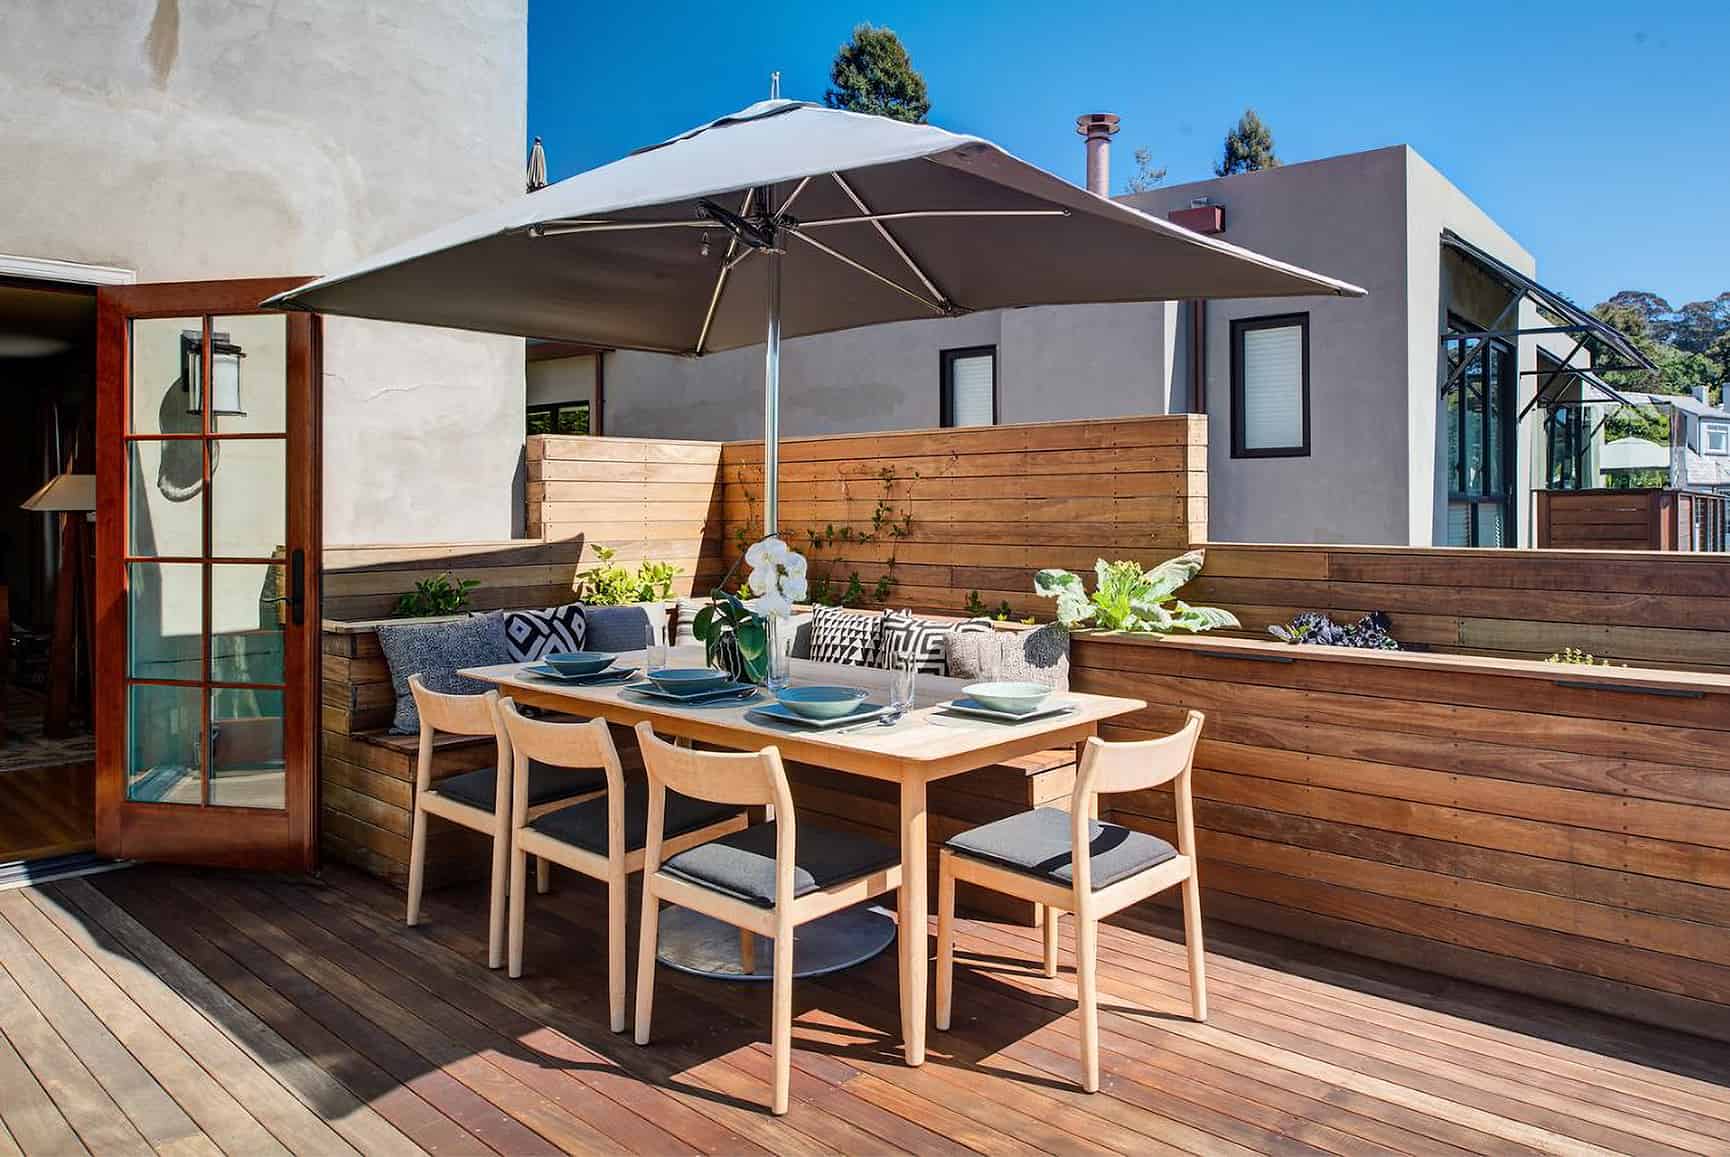 Outdoor dining area with an umbrella for shade.